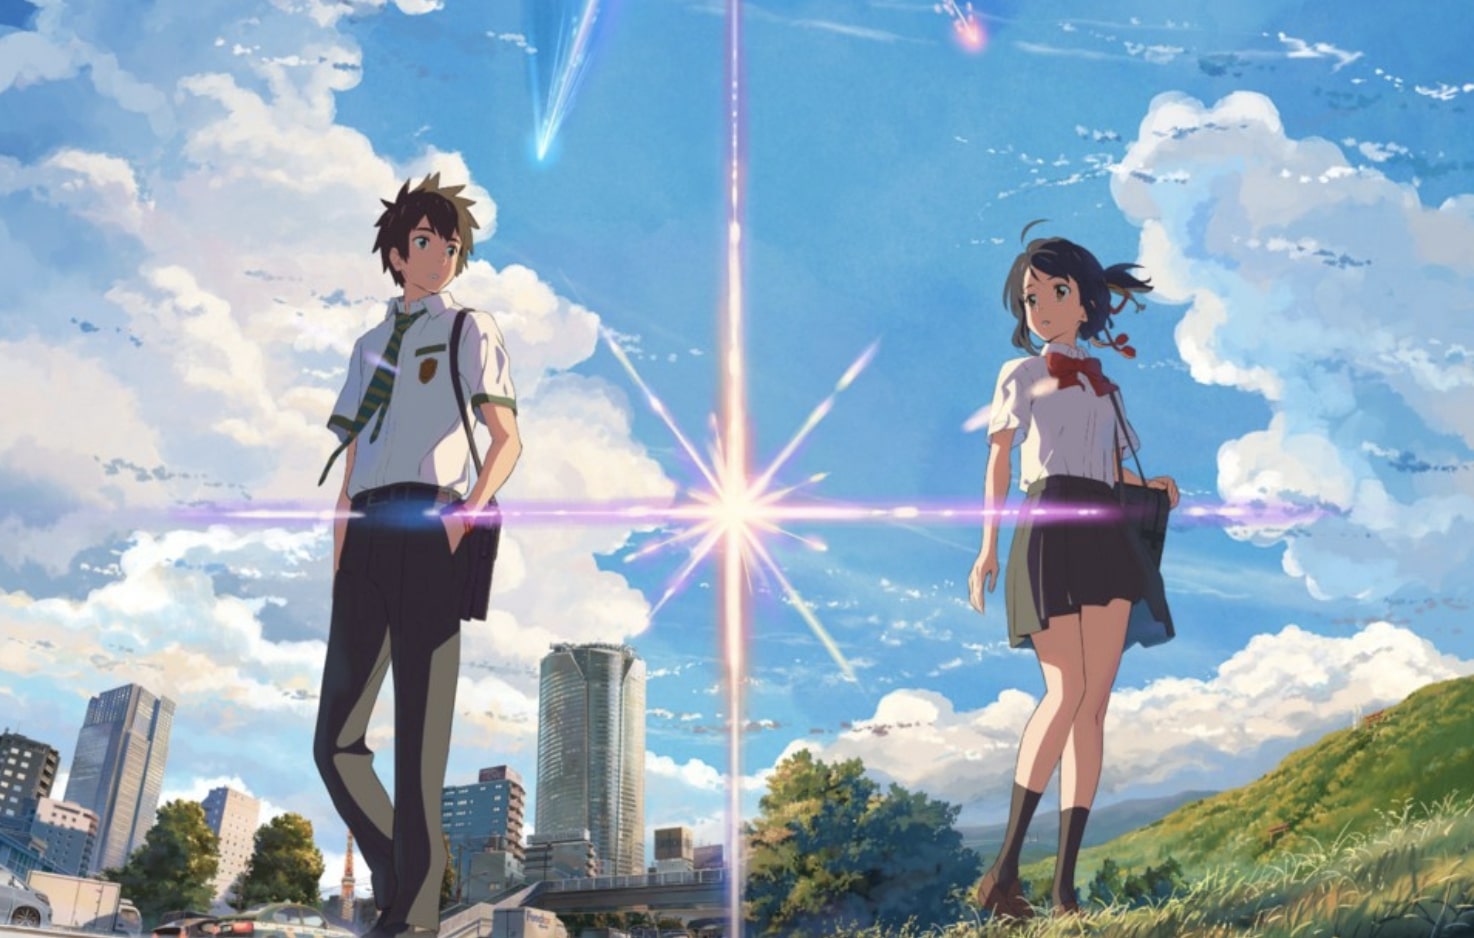 5 Best Anime Movies like Your Name